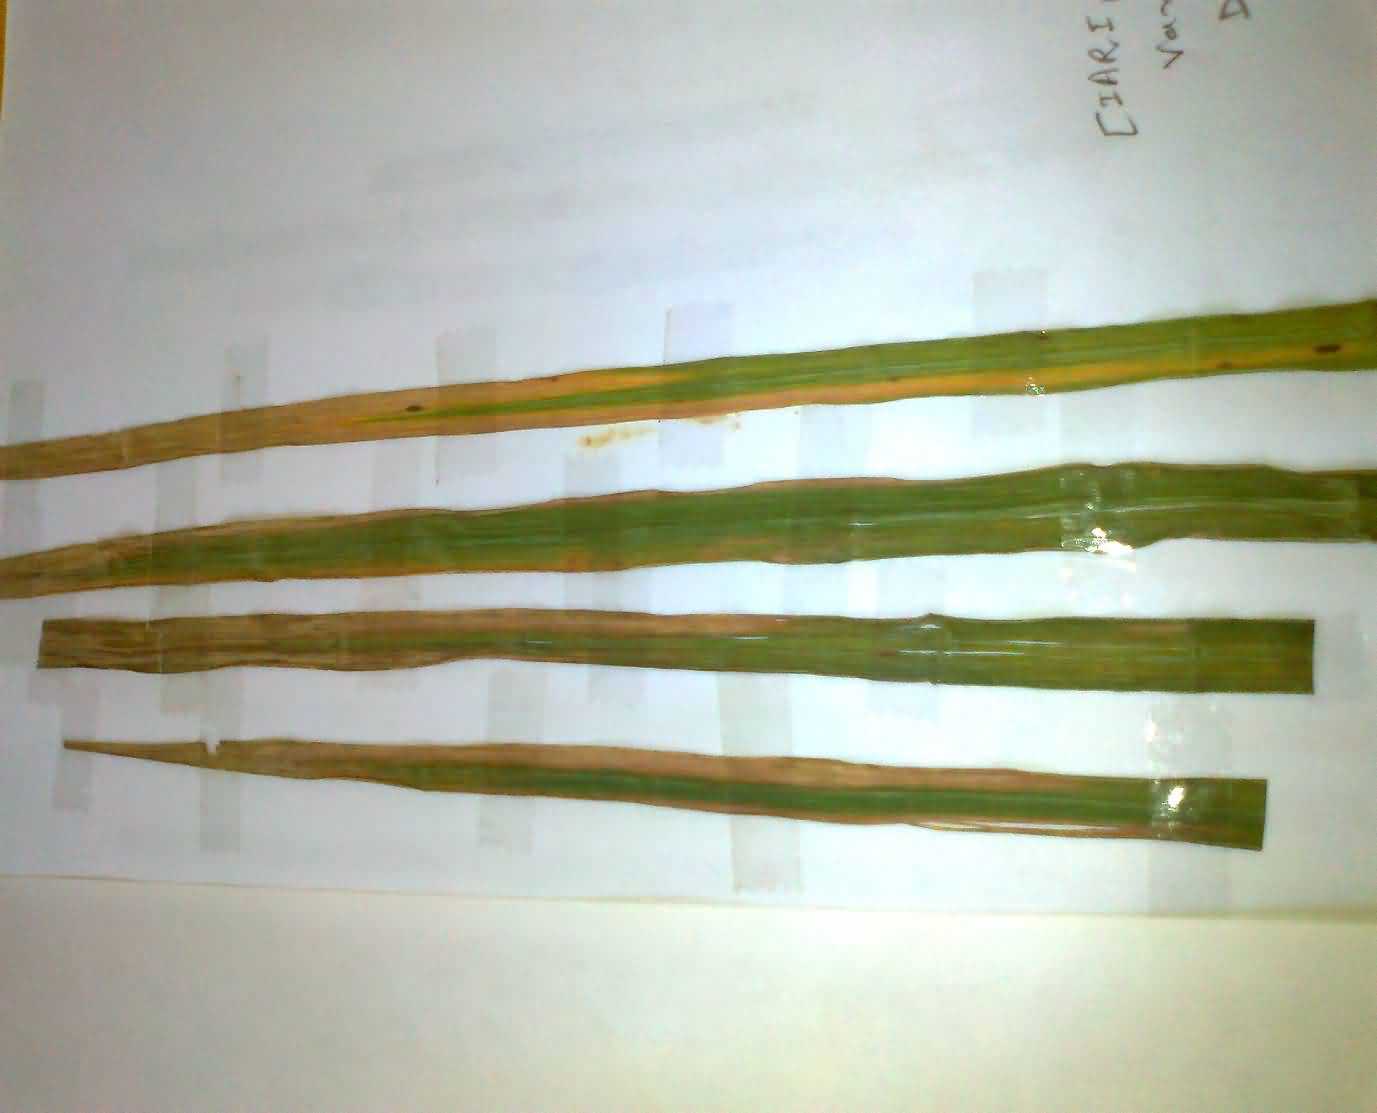 Bacterial Leaf Blight in paddy